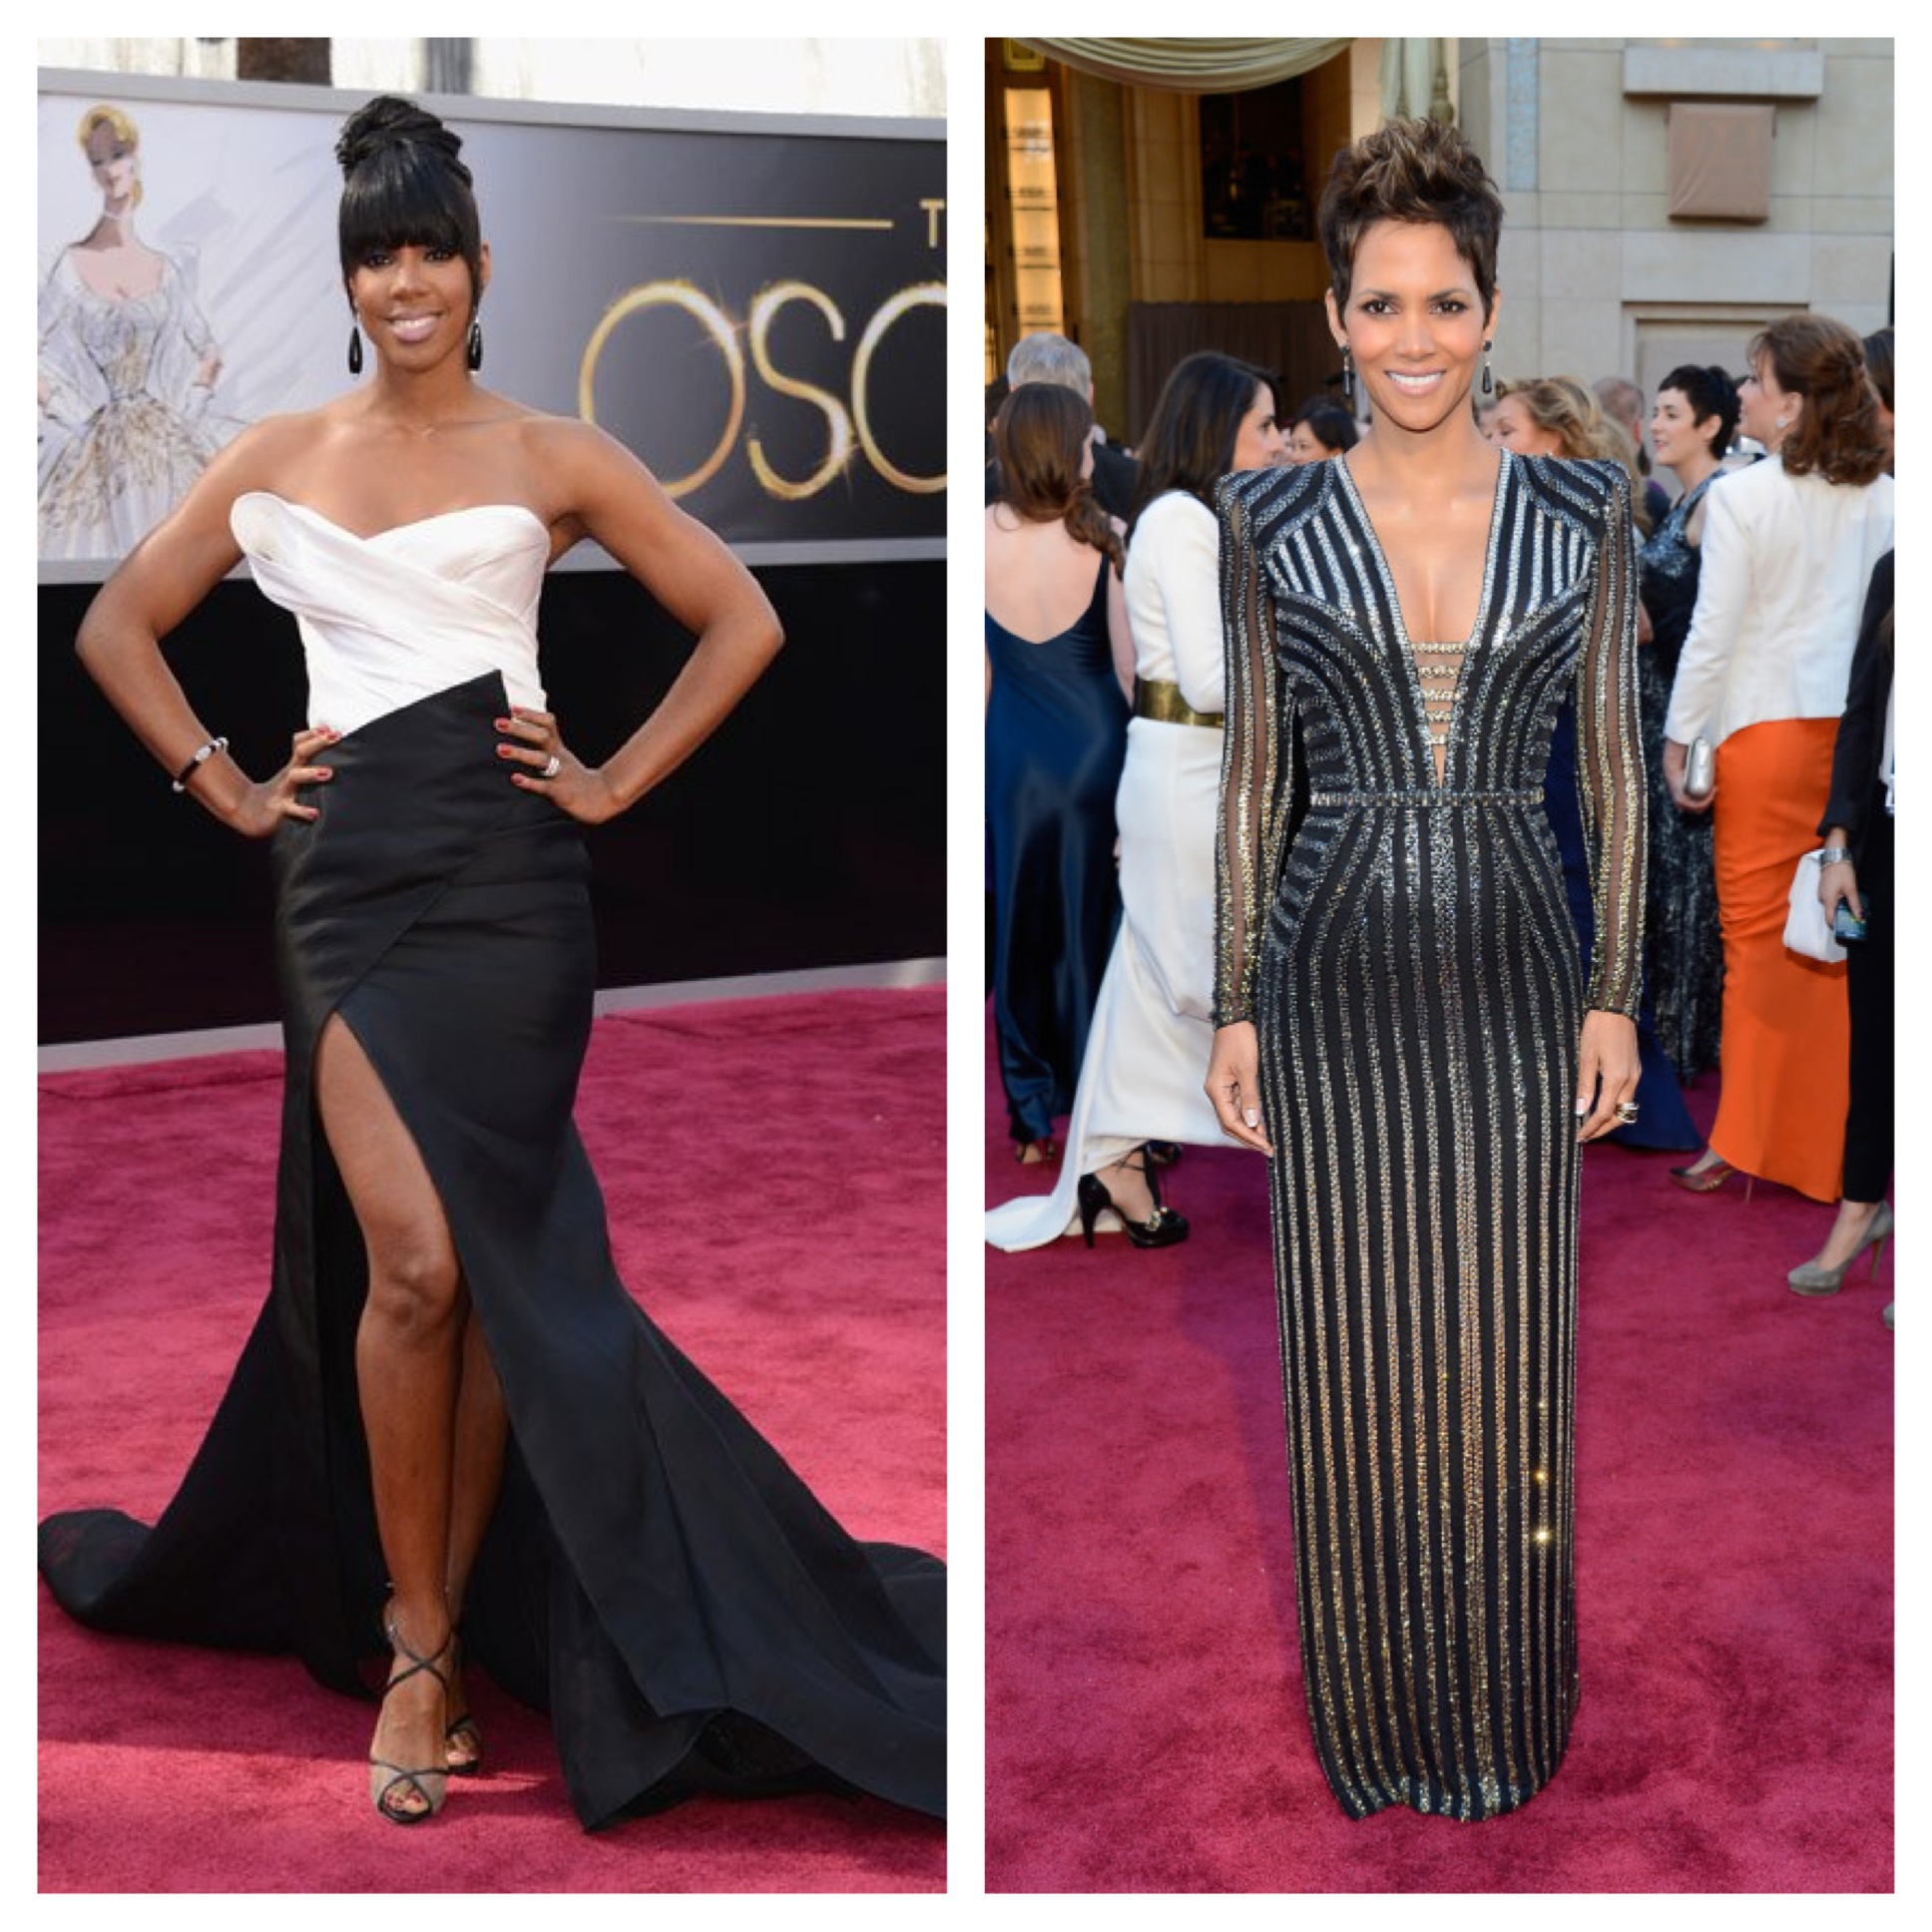 [Pix] Stars Upgrade the Glam Factor On Oscars Red Carpet ...